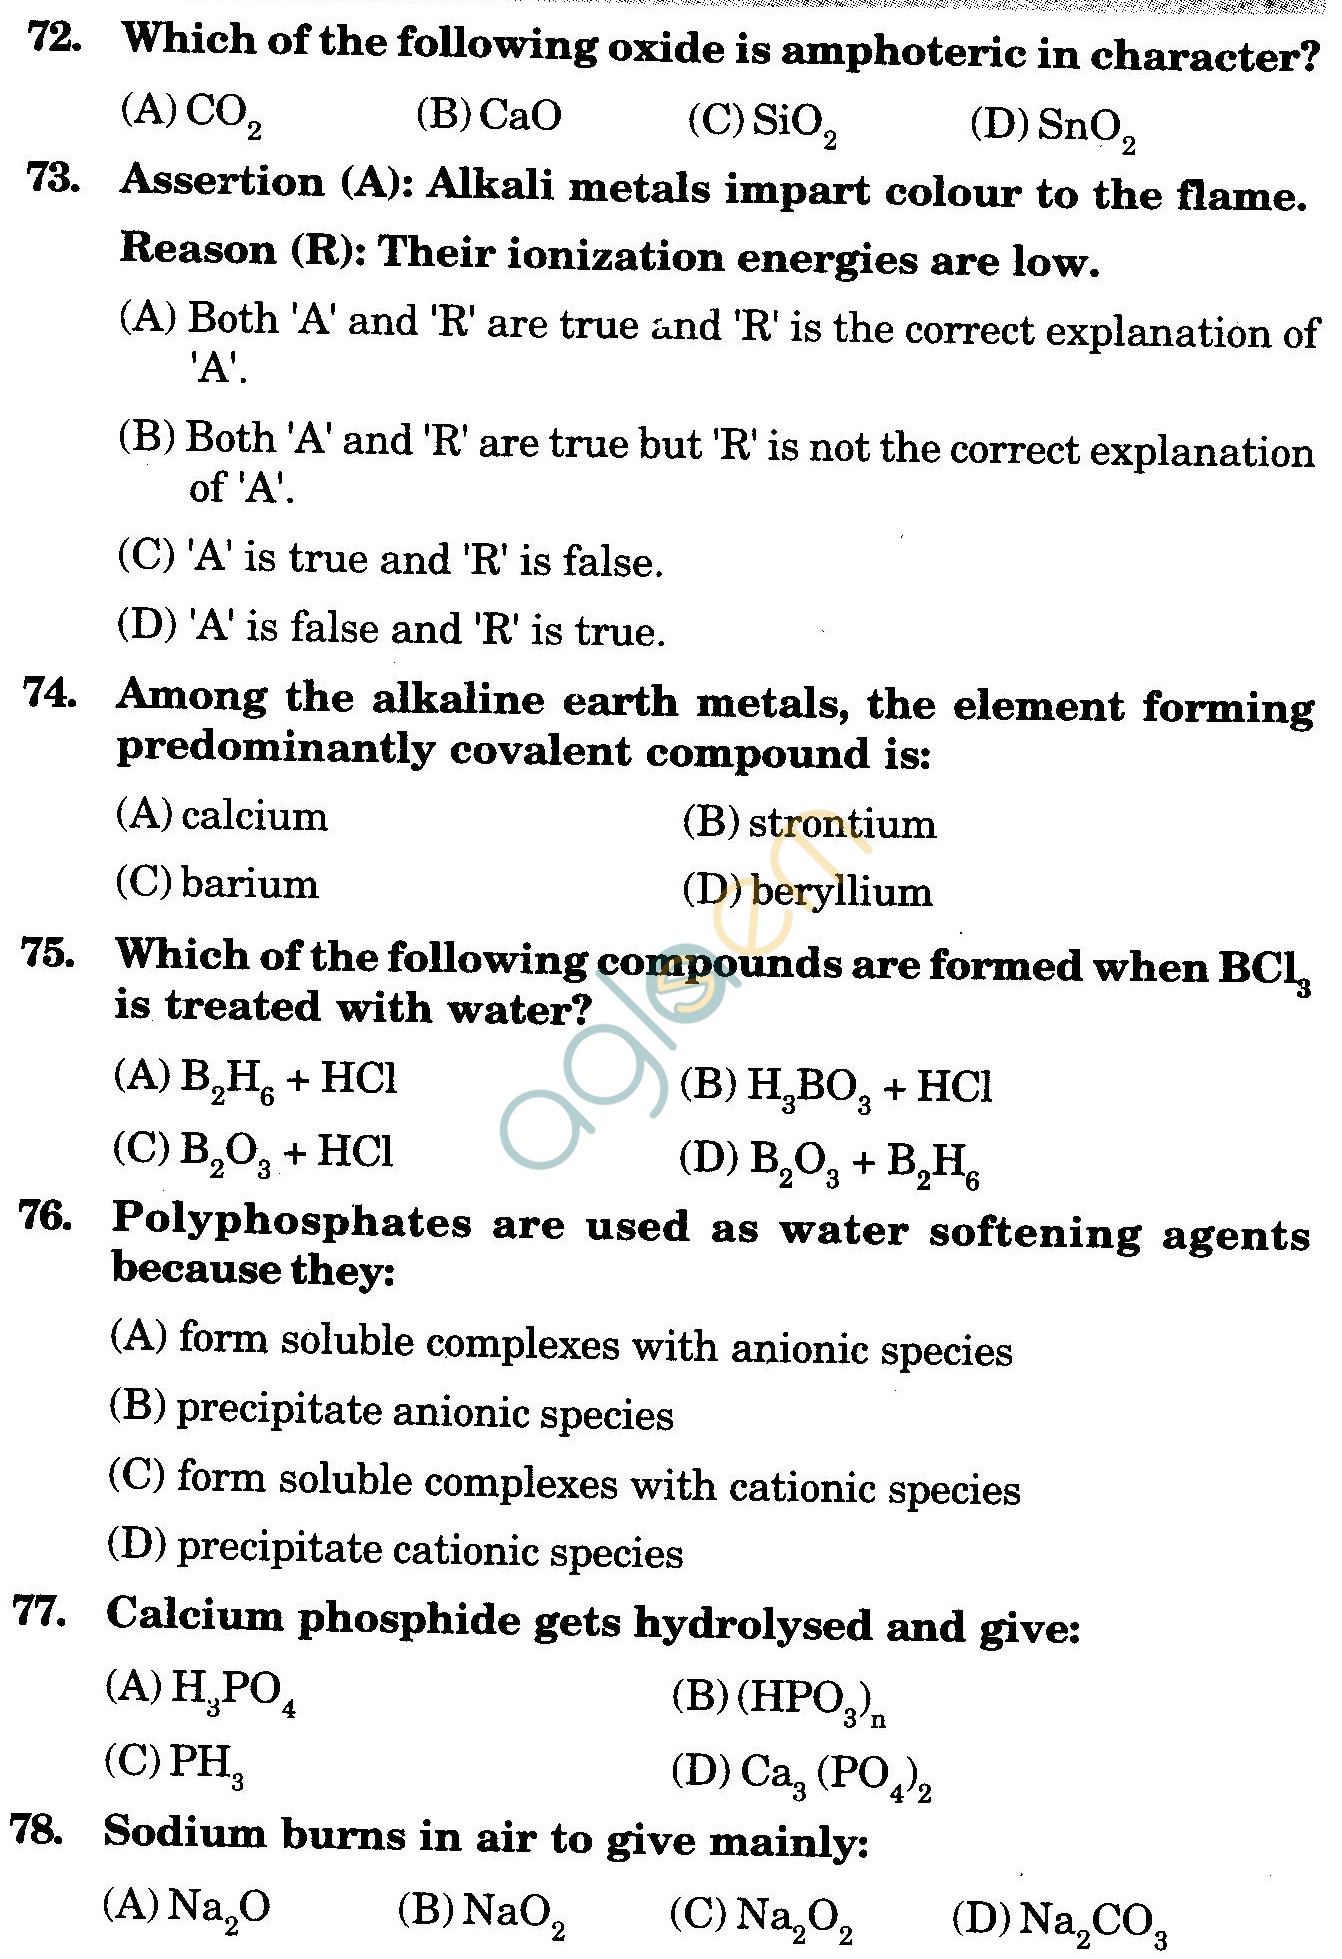 NSTSE 2009 Class XI PCM Question Paper with Answers - Chemistry